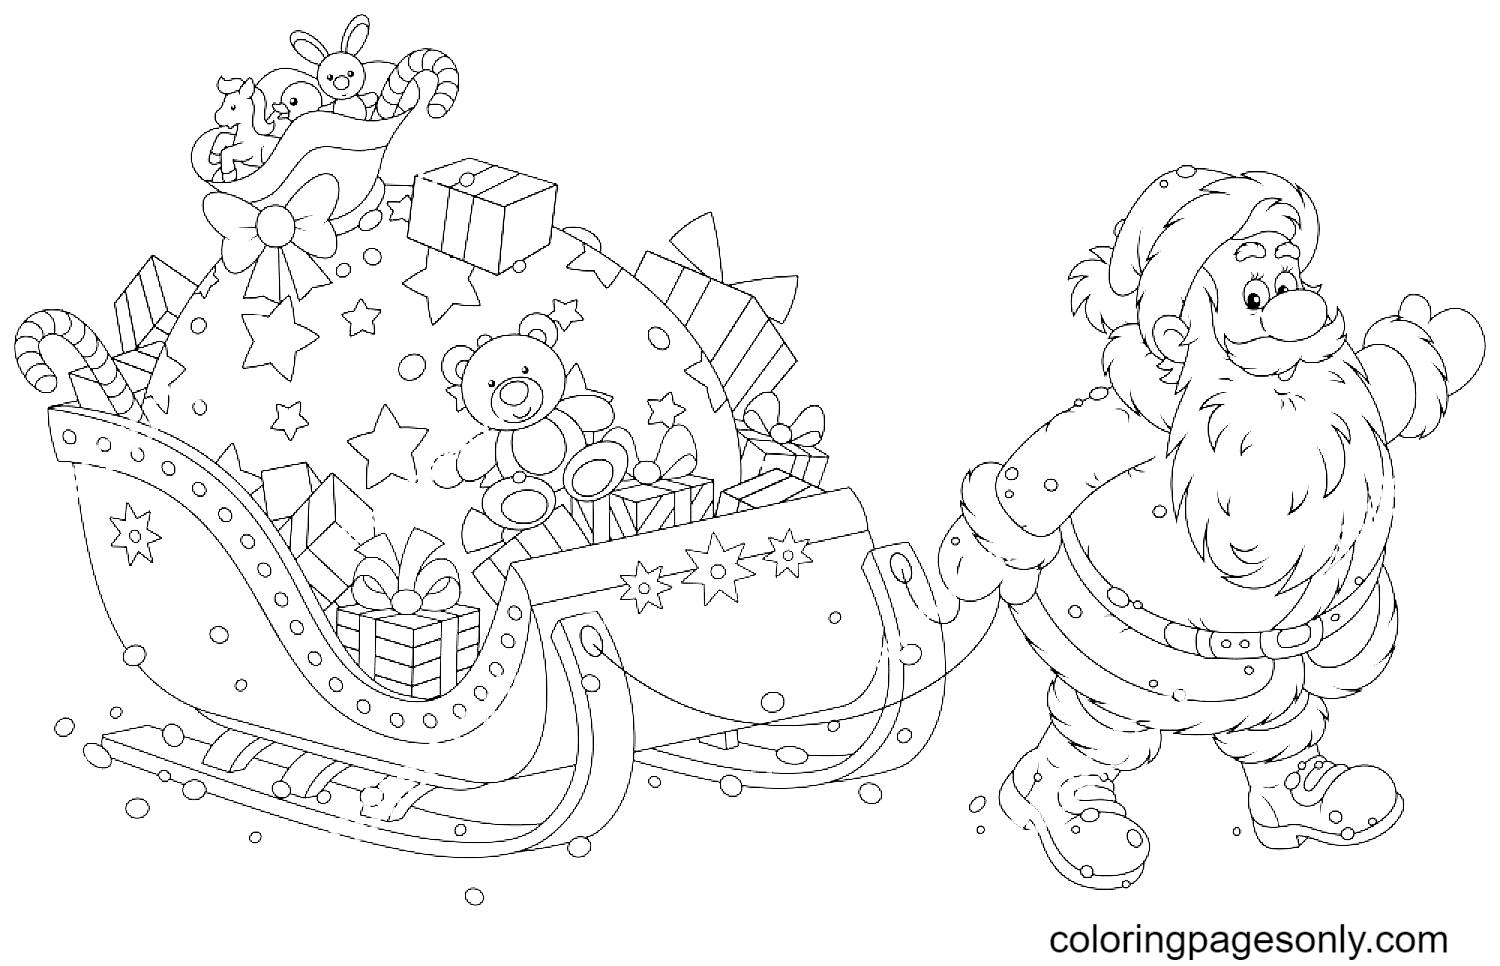 Santa Claus Carrying a Big Bag of Christmas Gifts on Sledge Coloring Page